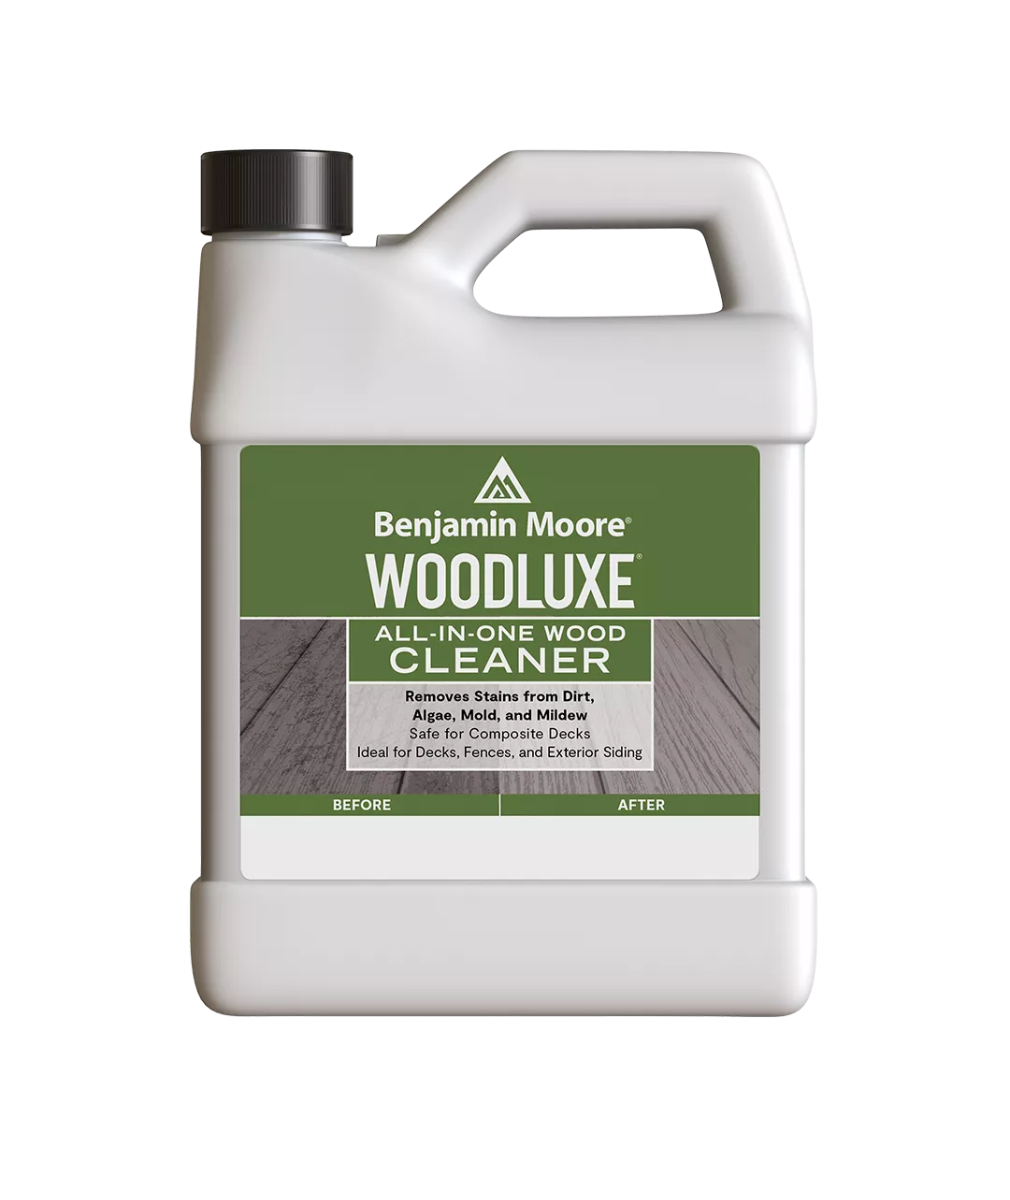 Benjamin Moore Woodluxe Wood Cleaner Gallon available to shop at Regal Paint Centers in Maryland, Virginia and DC.